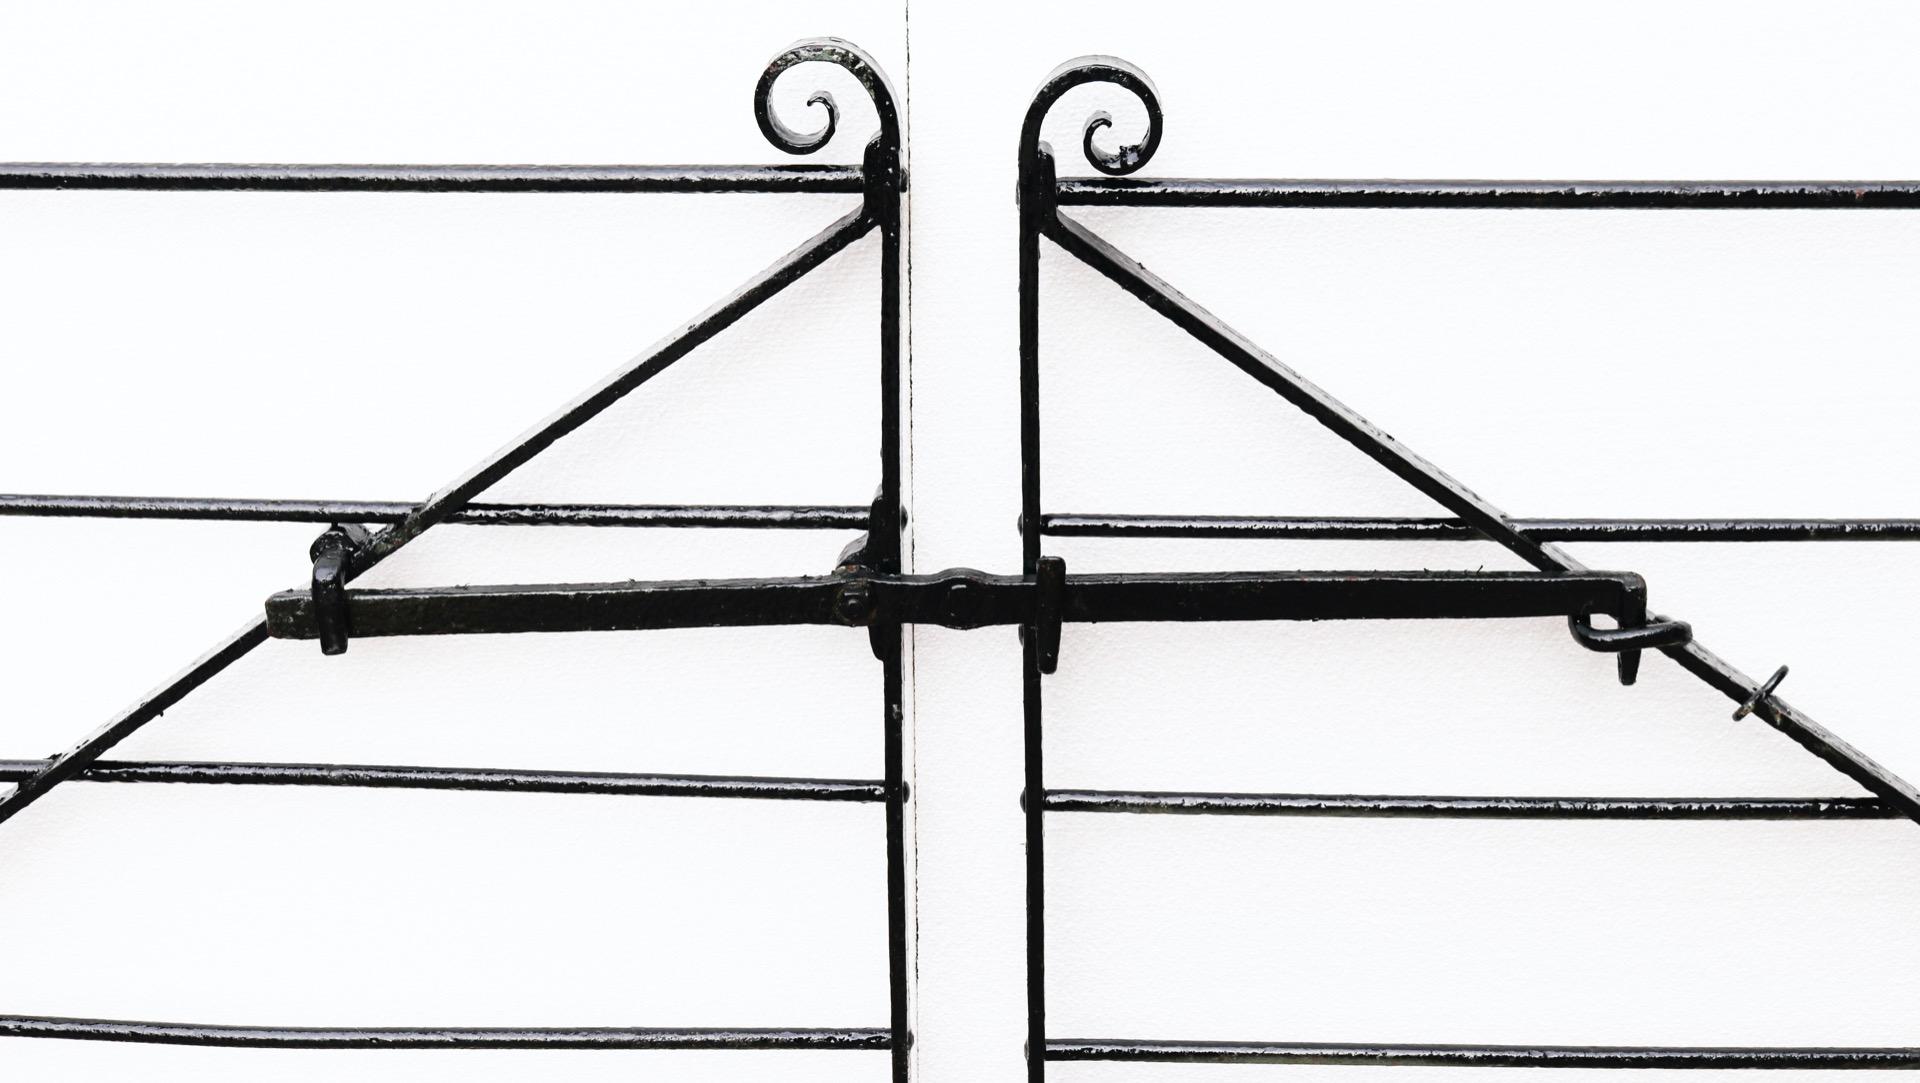 A set of Georgian gates with scrolled finials, constructed from wrought iron.

Additional dimensions

For an opening of approximately 243.5 cm (No width dimension but opening of approx to centre of hinge pins).